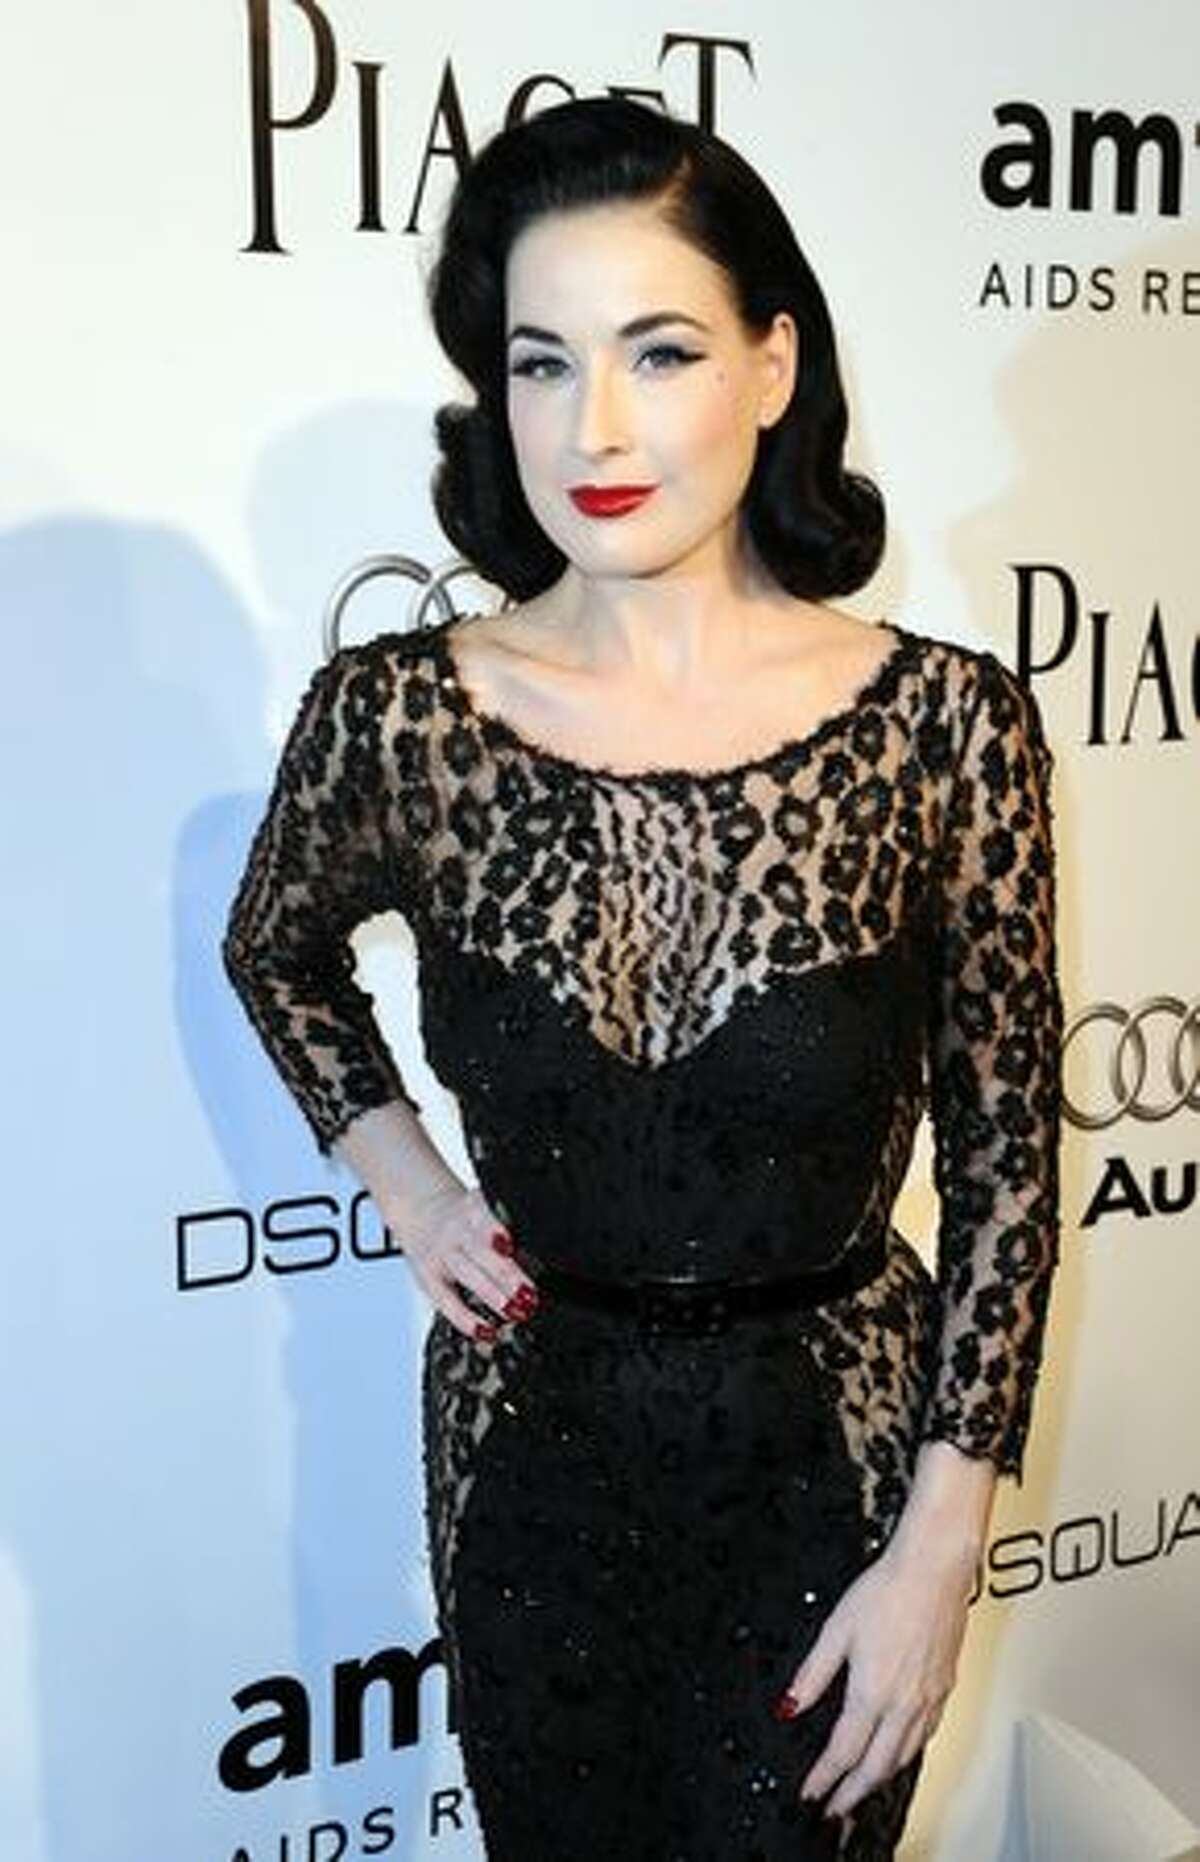 Dita Von Teese arrives at the amfAR's Inspiration Gala Los Angeles to benefit the Foundation's AIDS research programs at the Chateau Marmont in Hollywood, California.